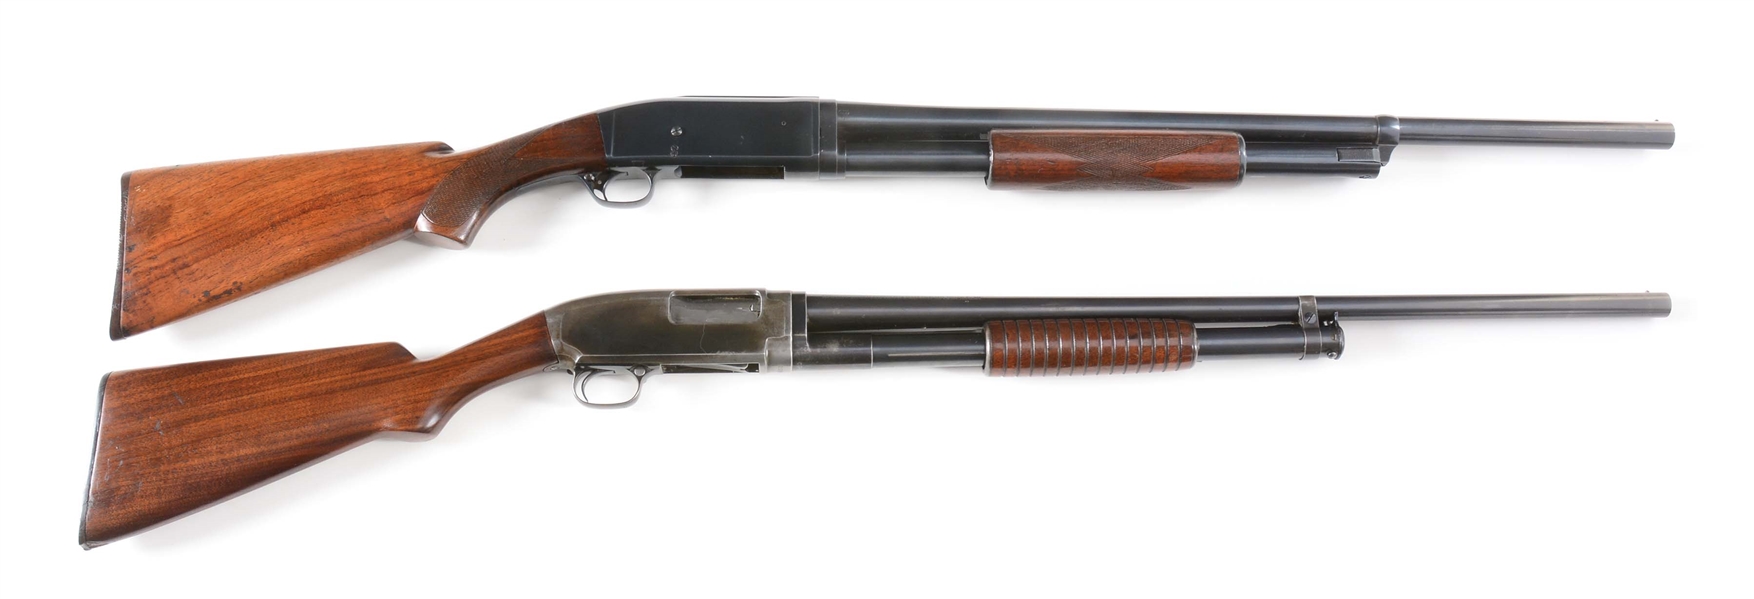 (C) LOT OF TWO: TWO CLASSIC PRE-WAR SLIDE ACTION SHOTGUNS, ONE REMINGTON AND ONE WINCHESTER.